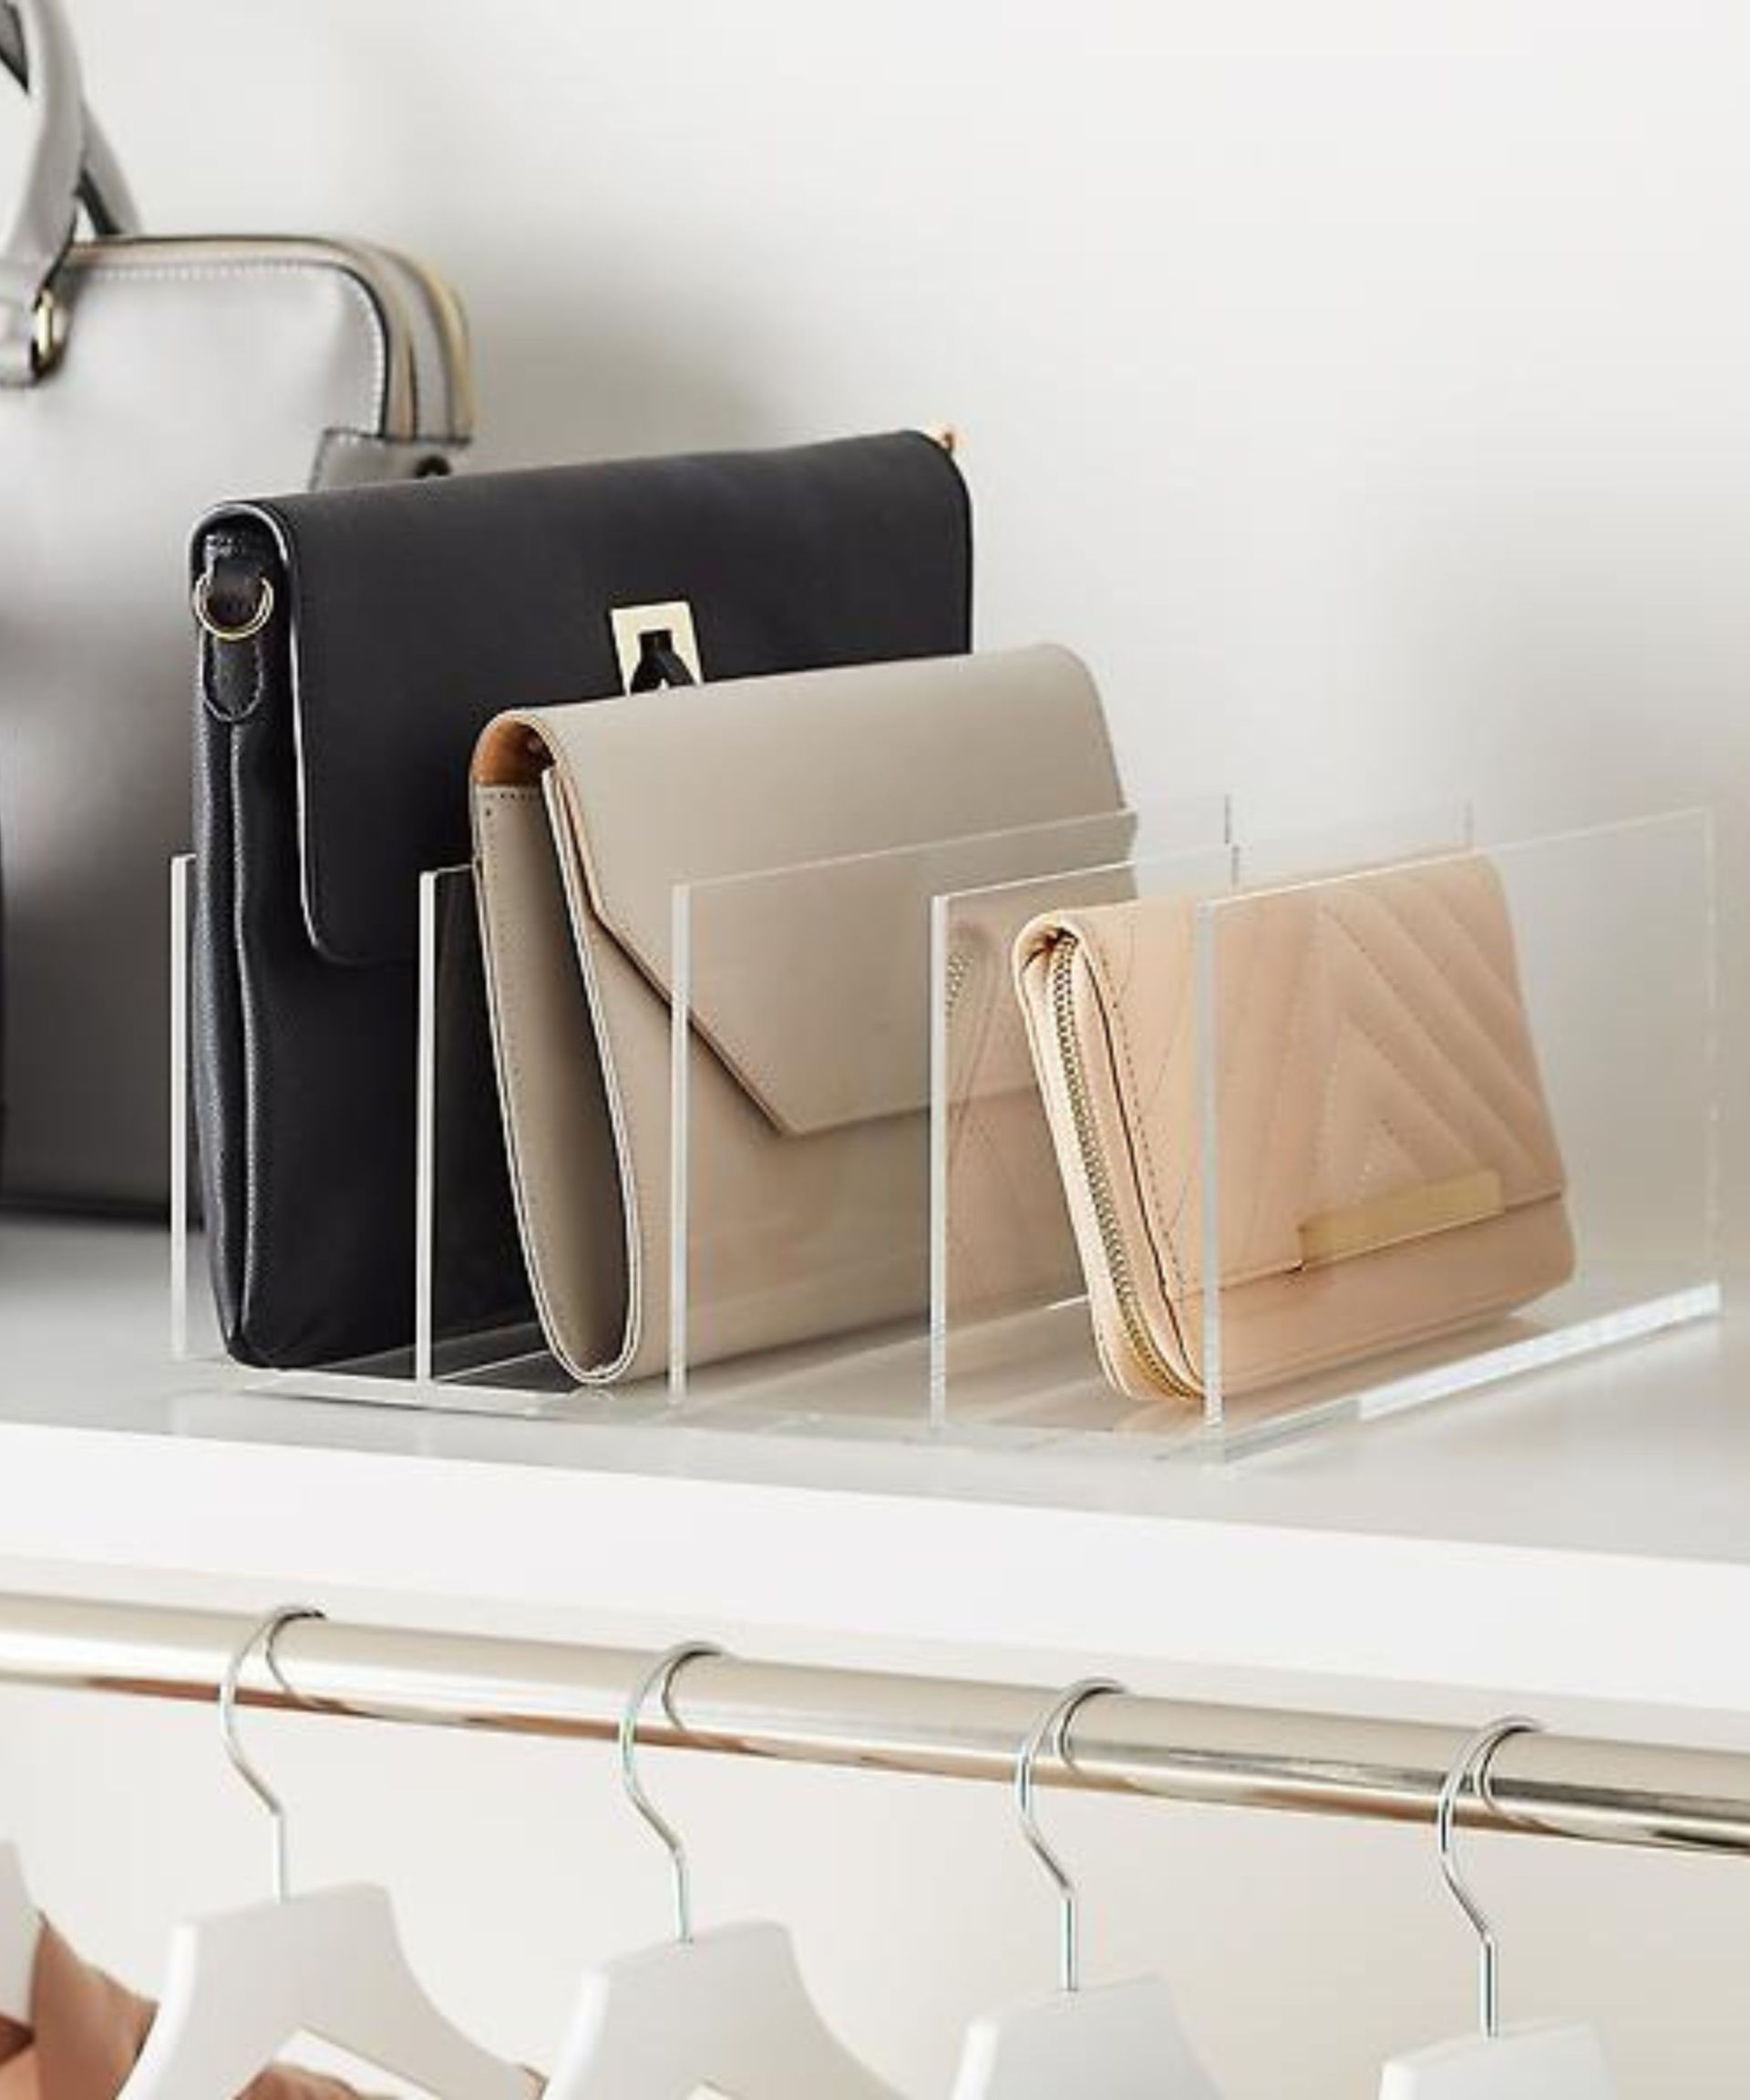 <p>                     ‘For clutches and small purses, using an acrylic organizer such as this Container Store option [pictured] on a shelf in your closet will allow you to easily corral your bags,’ explains Lauren Saltman. ‘If you have more than what fits in one, just add a second one side-by-side. Grouping the purses by color will help you to quickly find what you are looking for.’                   </p>                                      <p>                     What's more, organizers like these can be used to help store a range of closet accessories, be it folded jumpers and sweaters, or turn it on its side to help separate folded trousers and leggings.                     </p>                                      <p>                     ‘For large purses, I recommend stuffing them with acid-free paper or customized purse pillows’ Lauren Saltman, professional organizer, recommends. ‘This will help prevent unnecessary creasing due to long-term storage. If your closet has the space, displaying your stuffed purses on an upper shelf can be a very pleasant way to decorate your closet when the bags are not in use too.’                    </p>